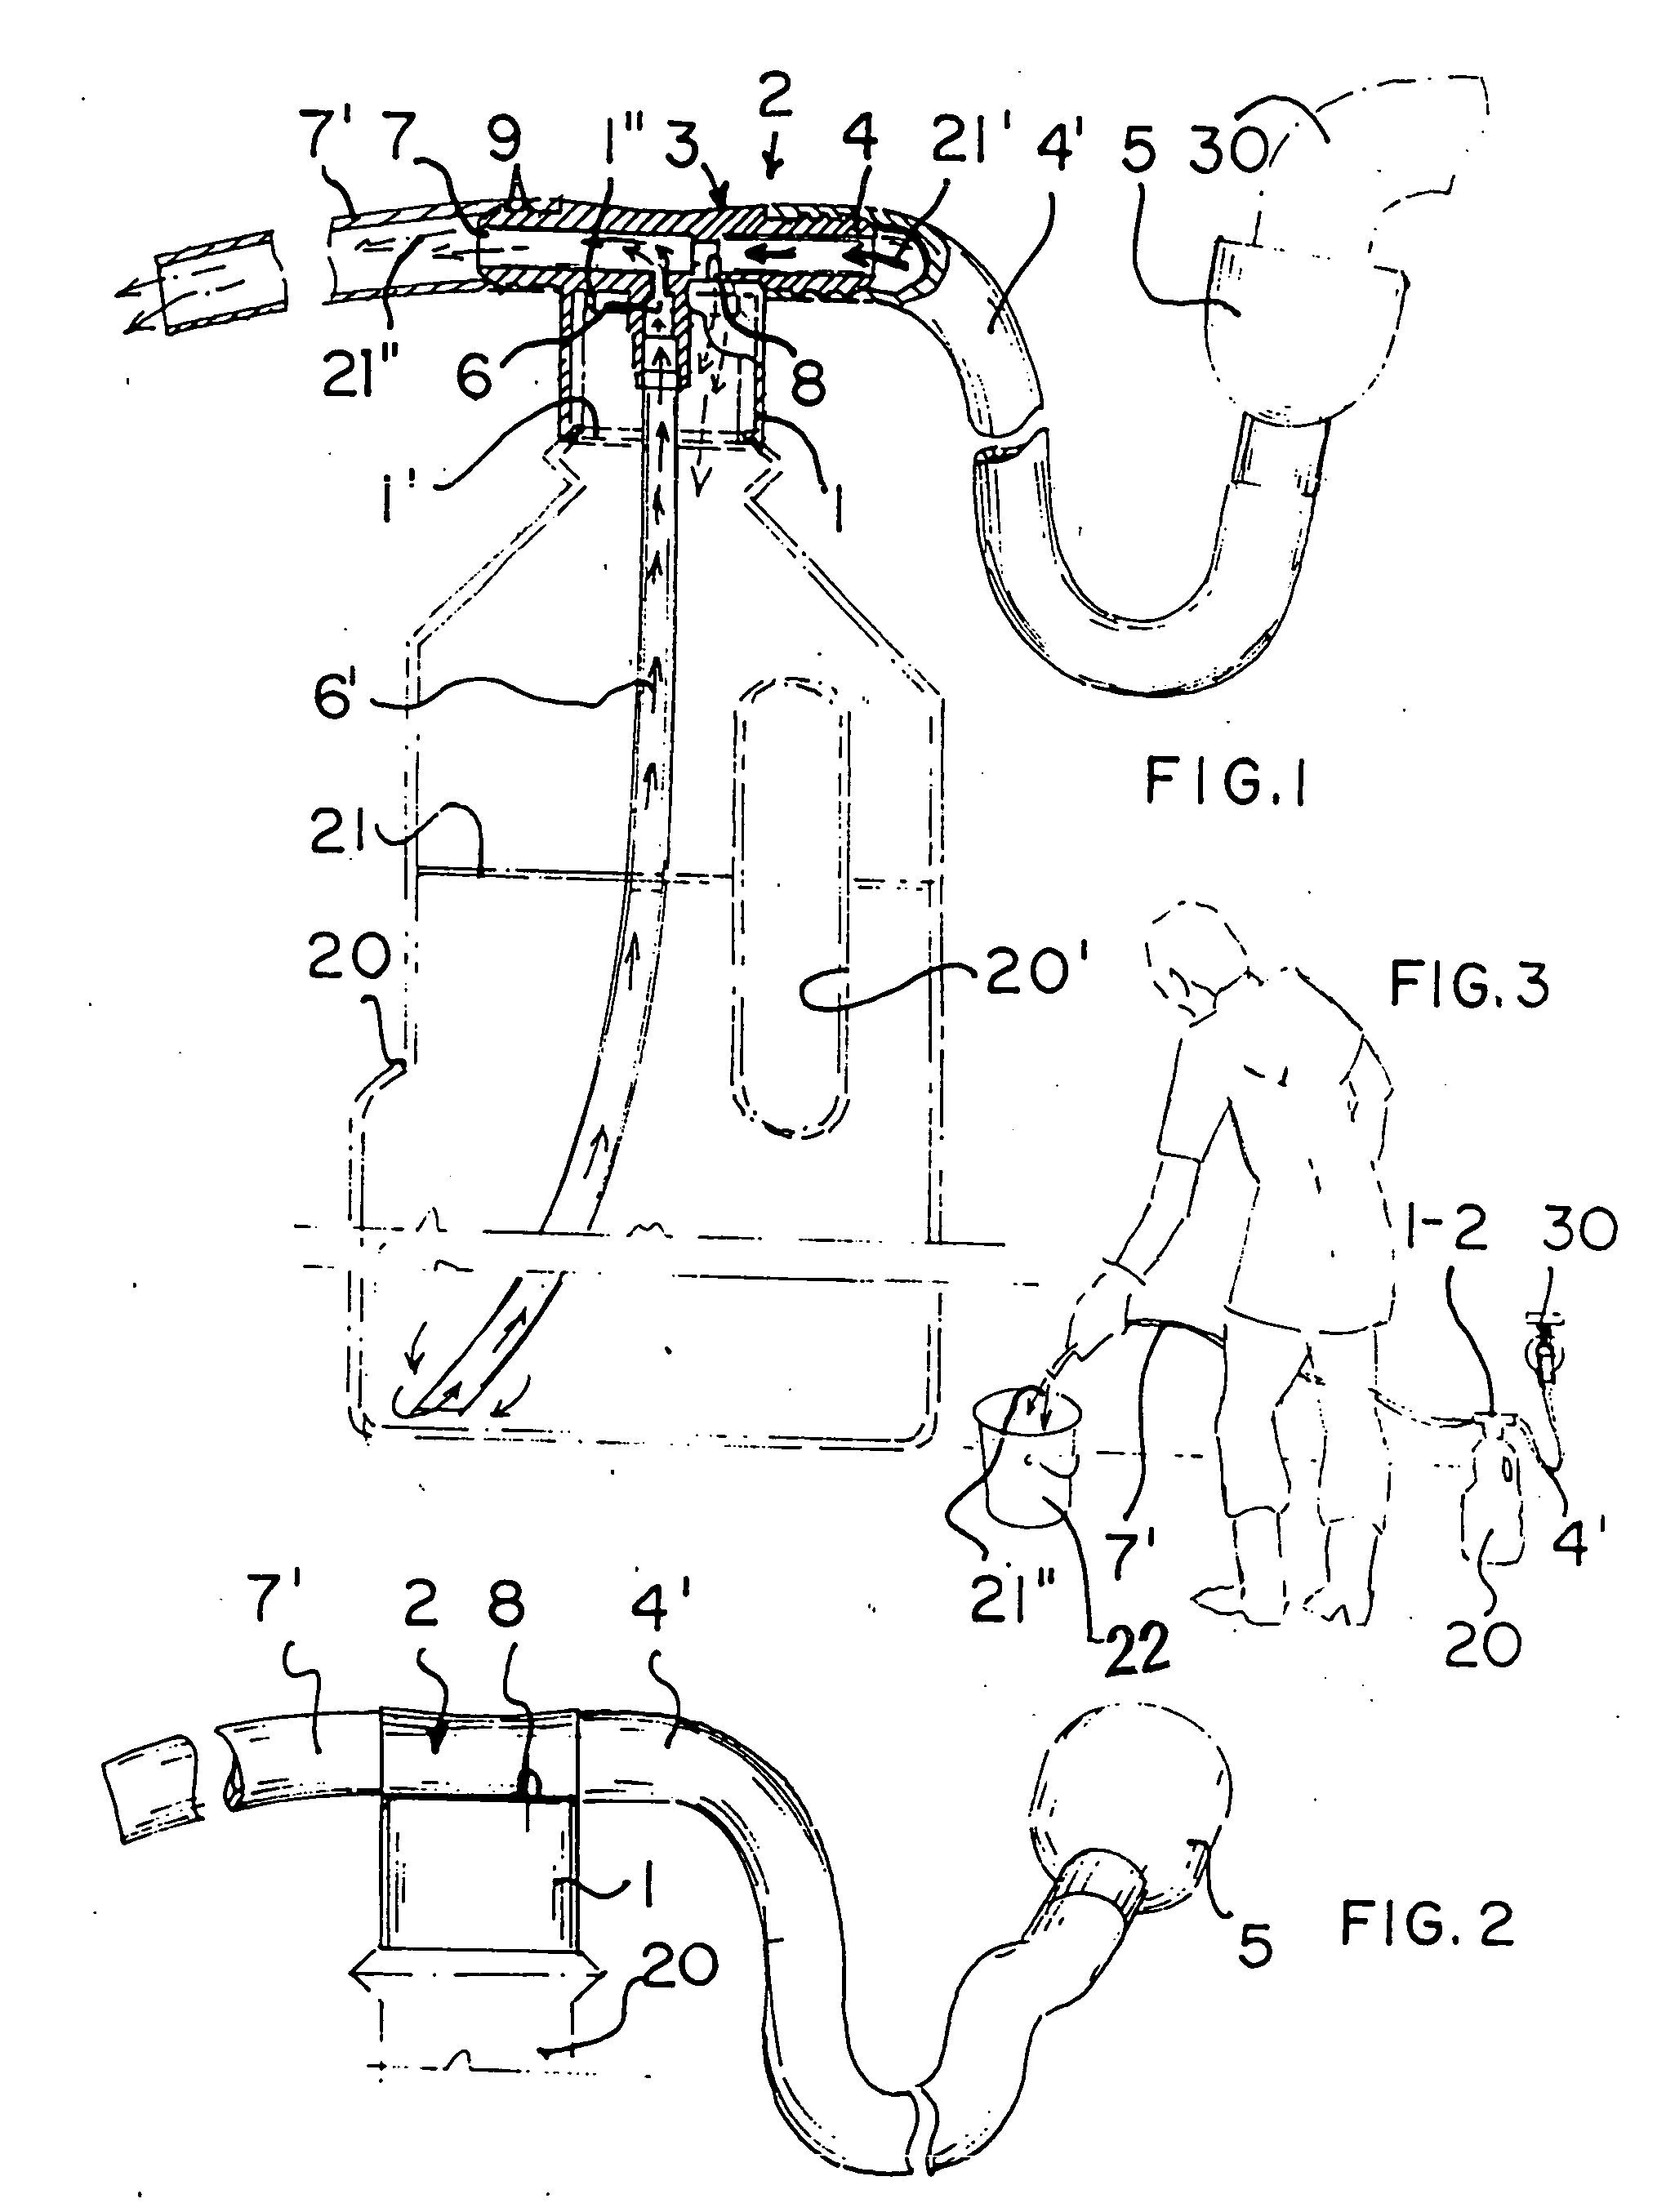 Device for mixing-dosing liquid cleaning product